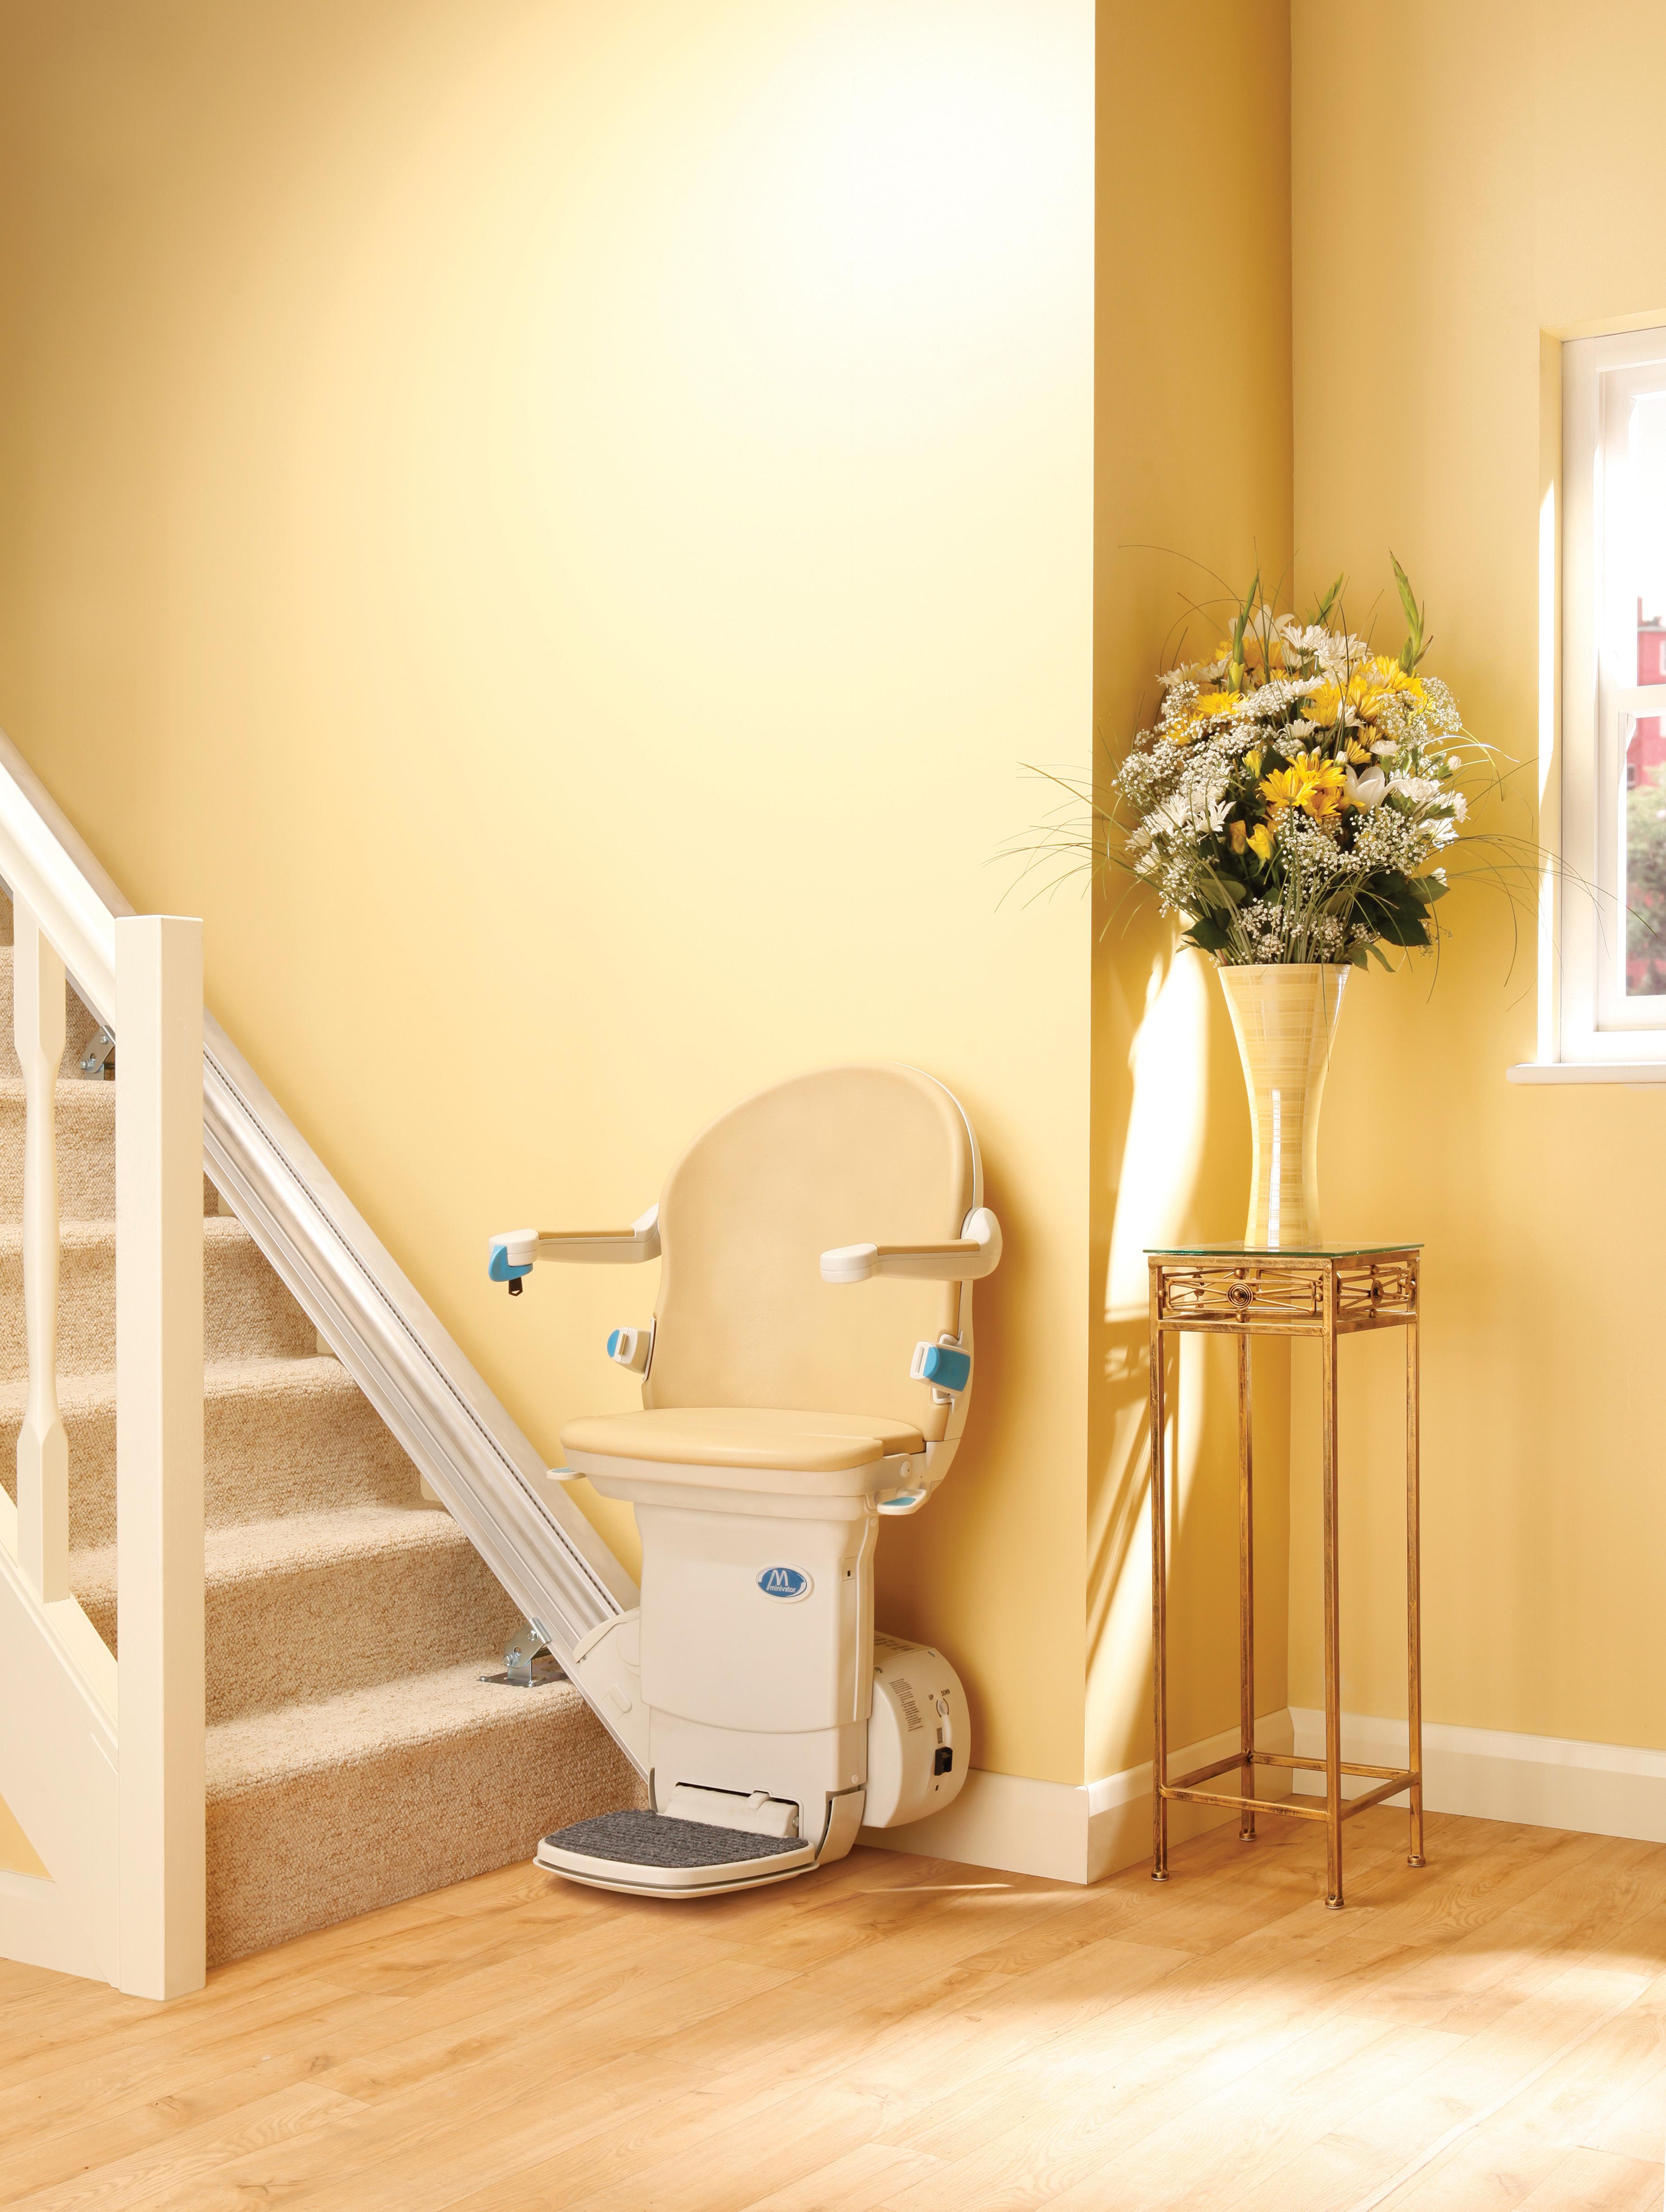 Images Stair Lift Experts